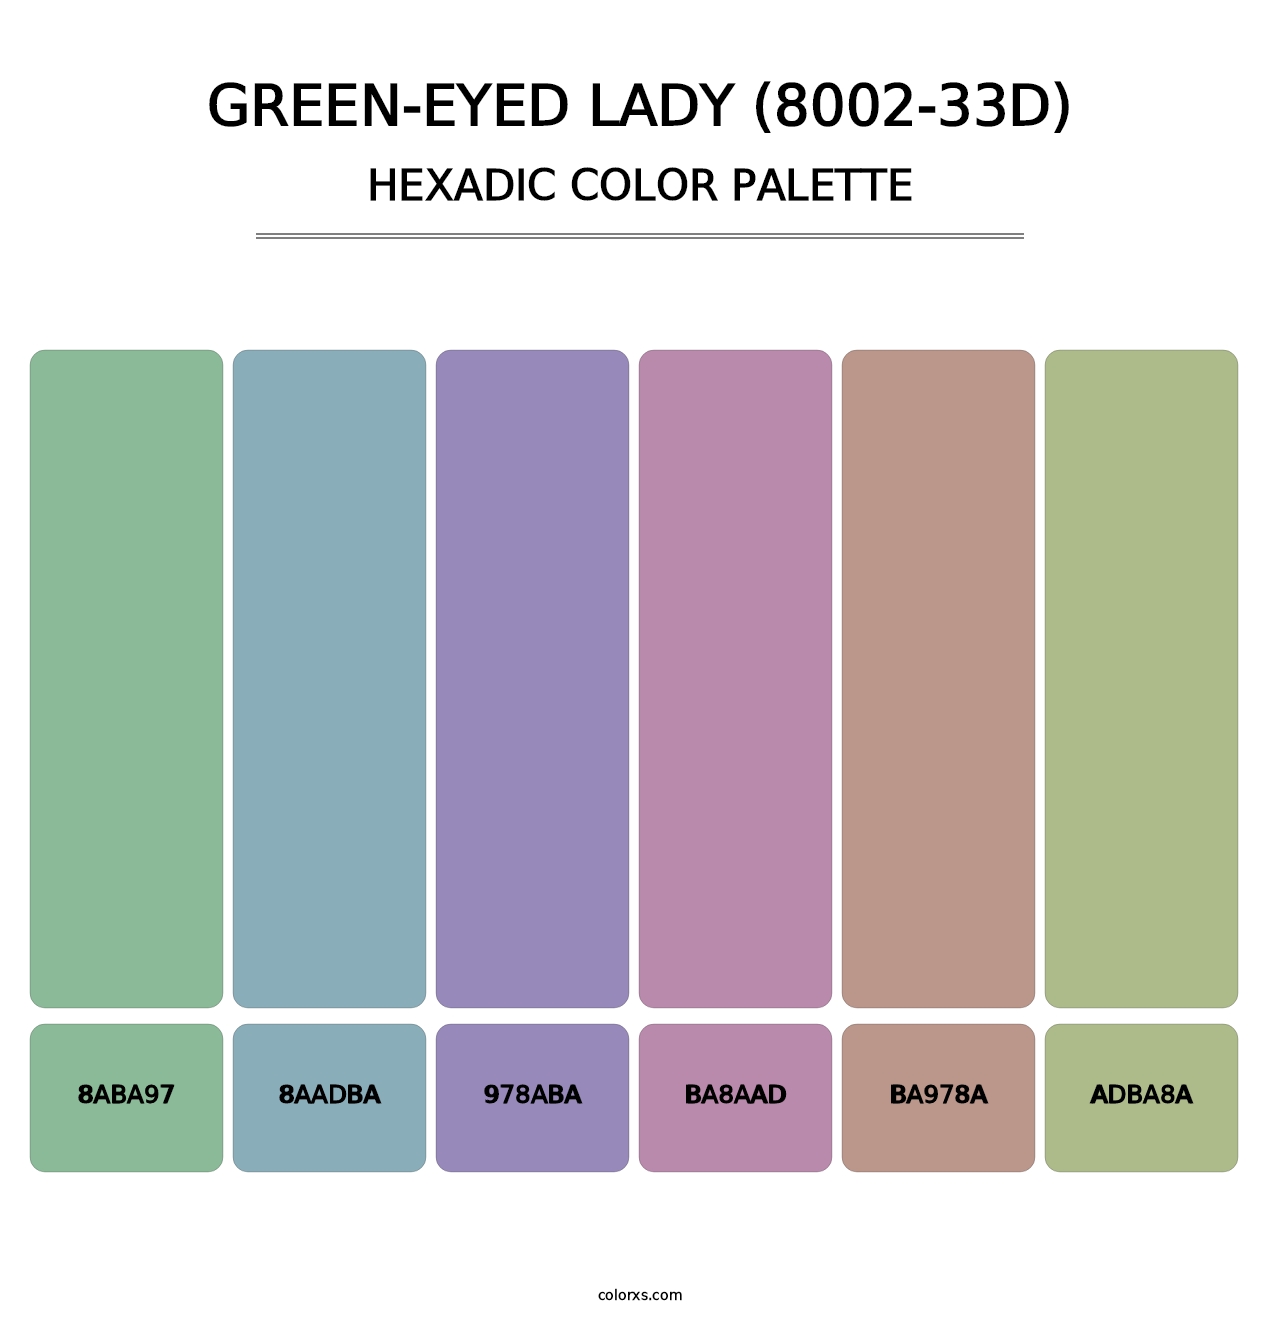 Green-Eyed Lady (8002-33D) - Hexadic Color Palette